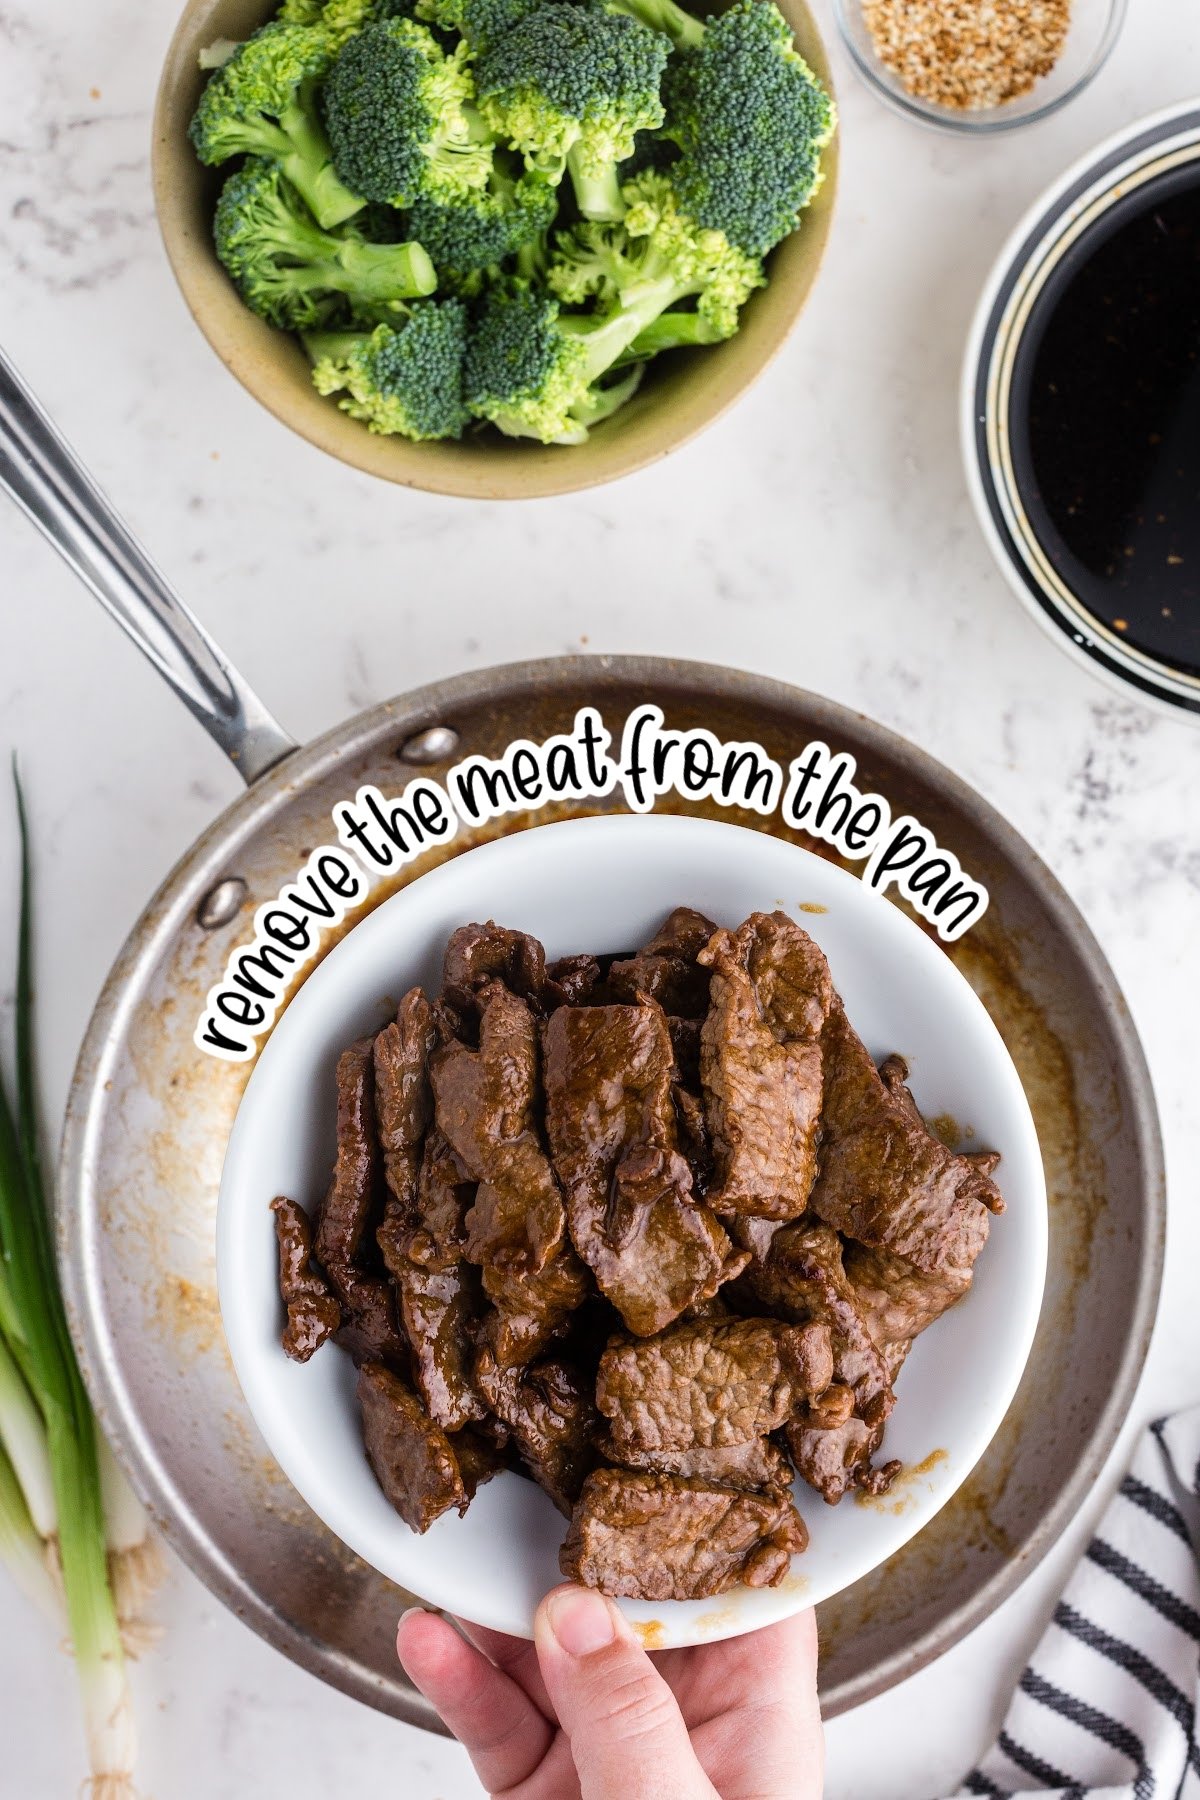 Seared beef for Panda Express beef and broccoli on plate held over saute pan, with text "remove the meat from the pan."